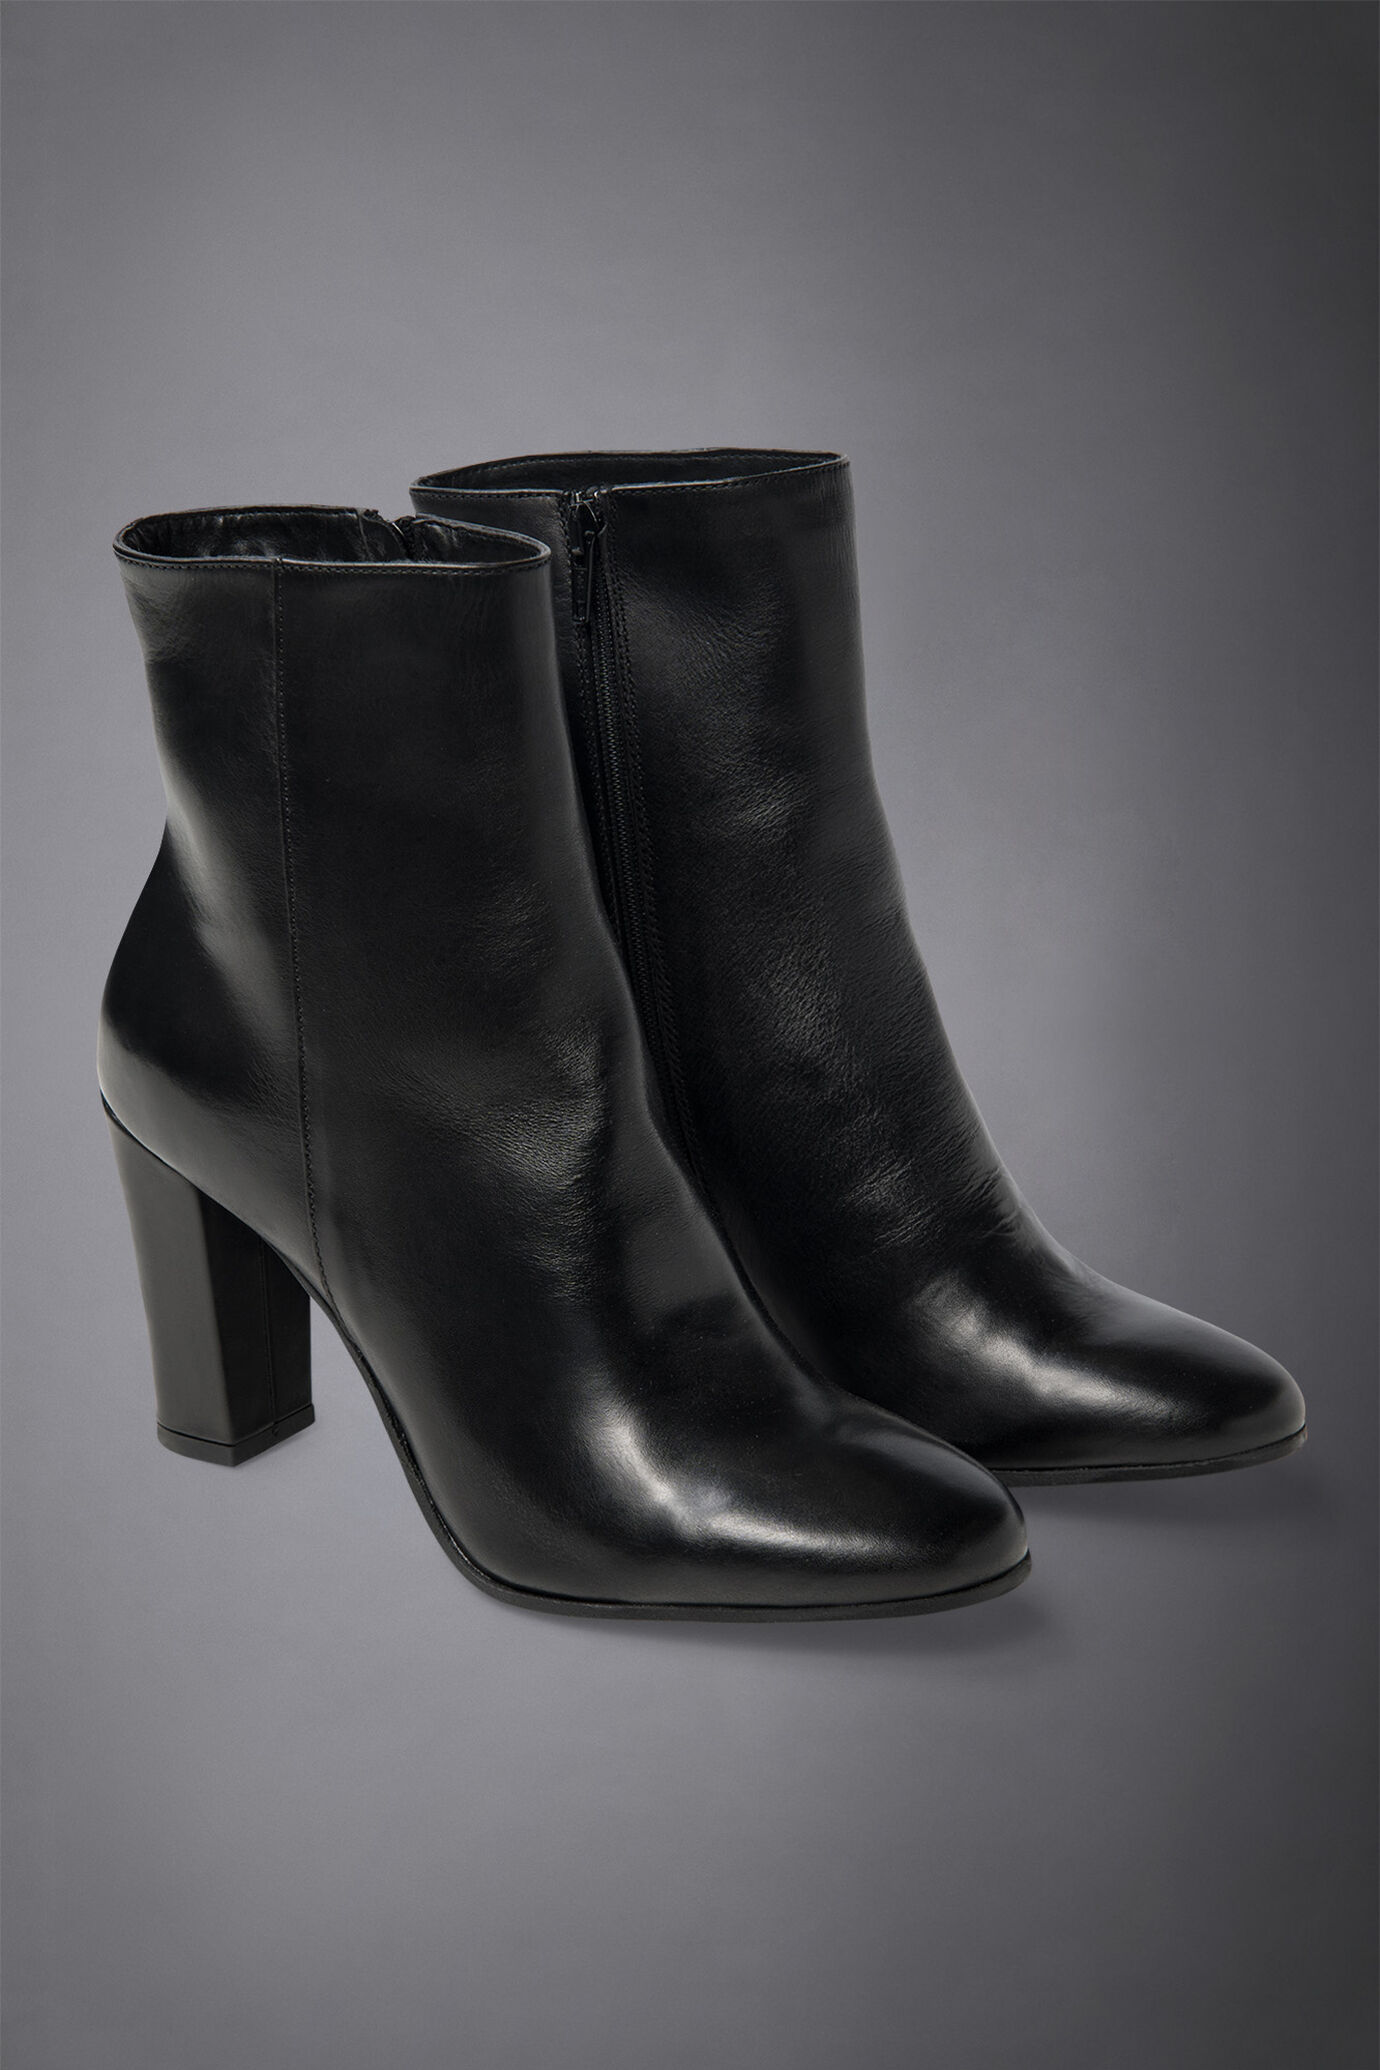 Women's truncated boot 100% leather